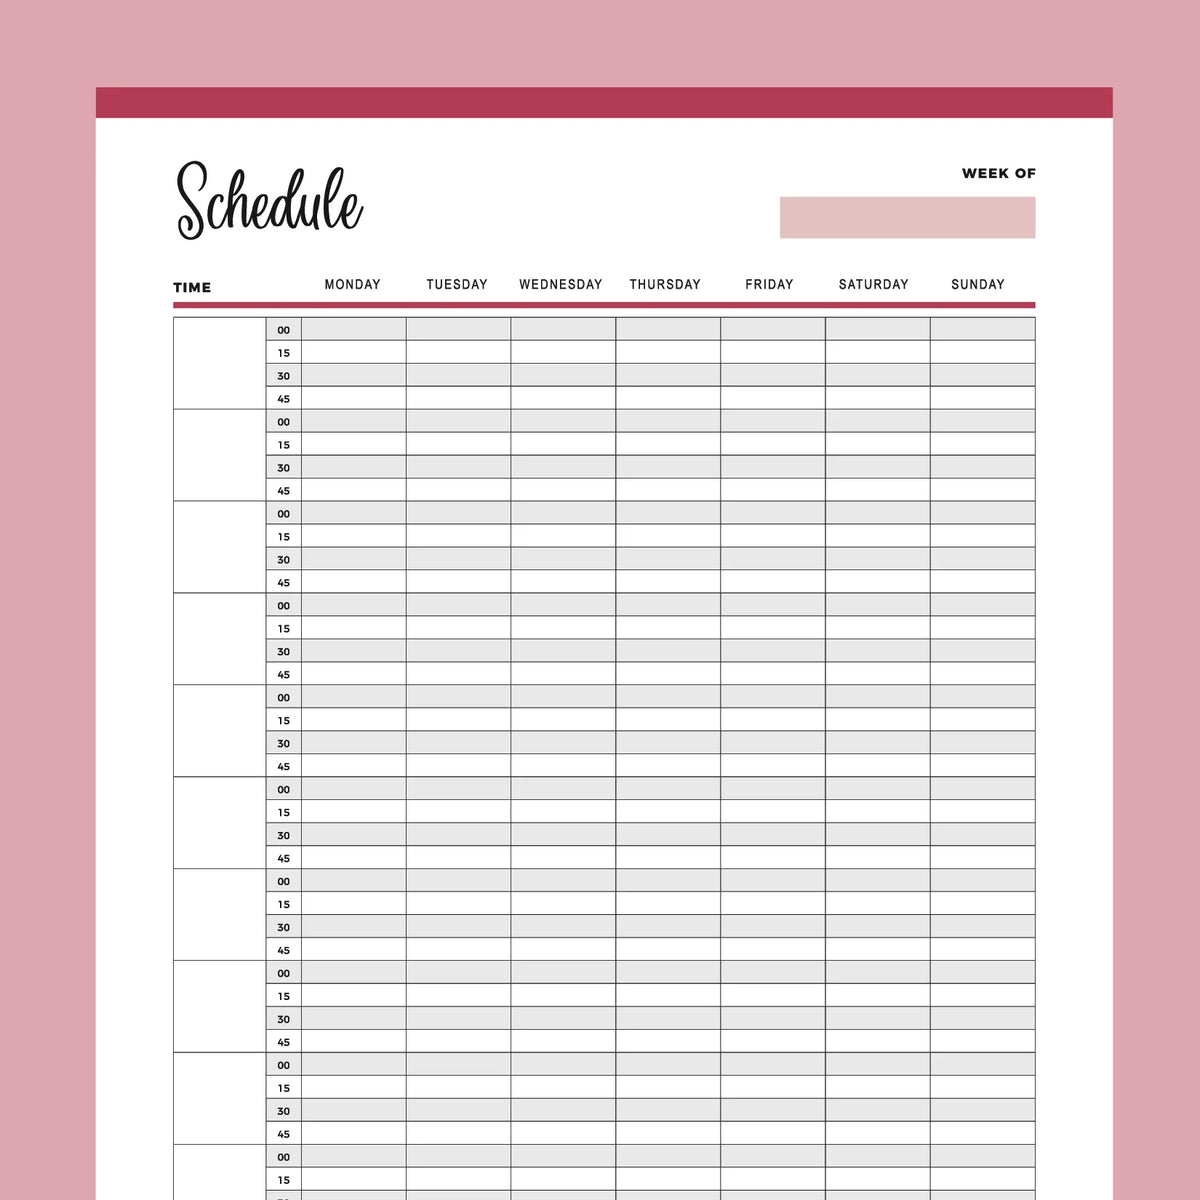 free-printable-daily-planner-15-minute-intervals-daily-calendar